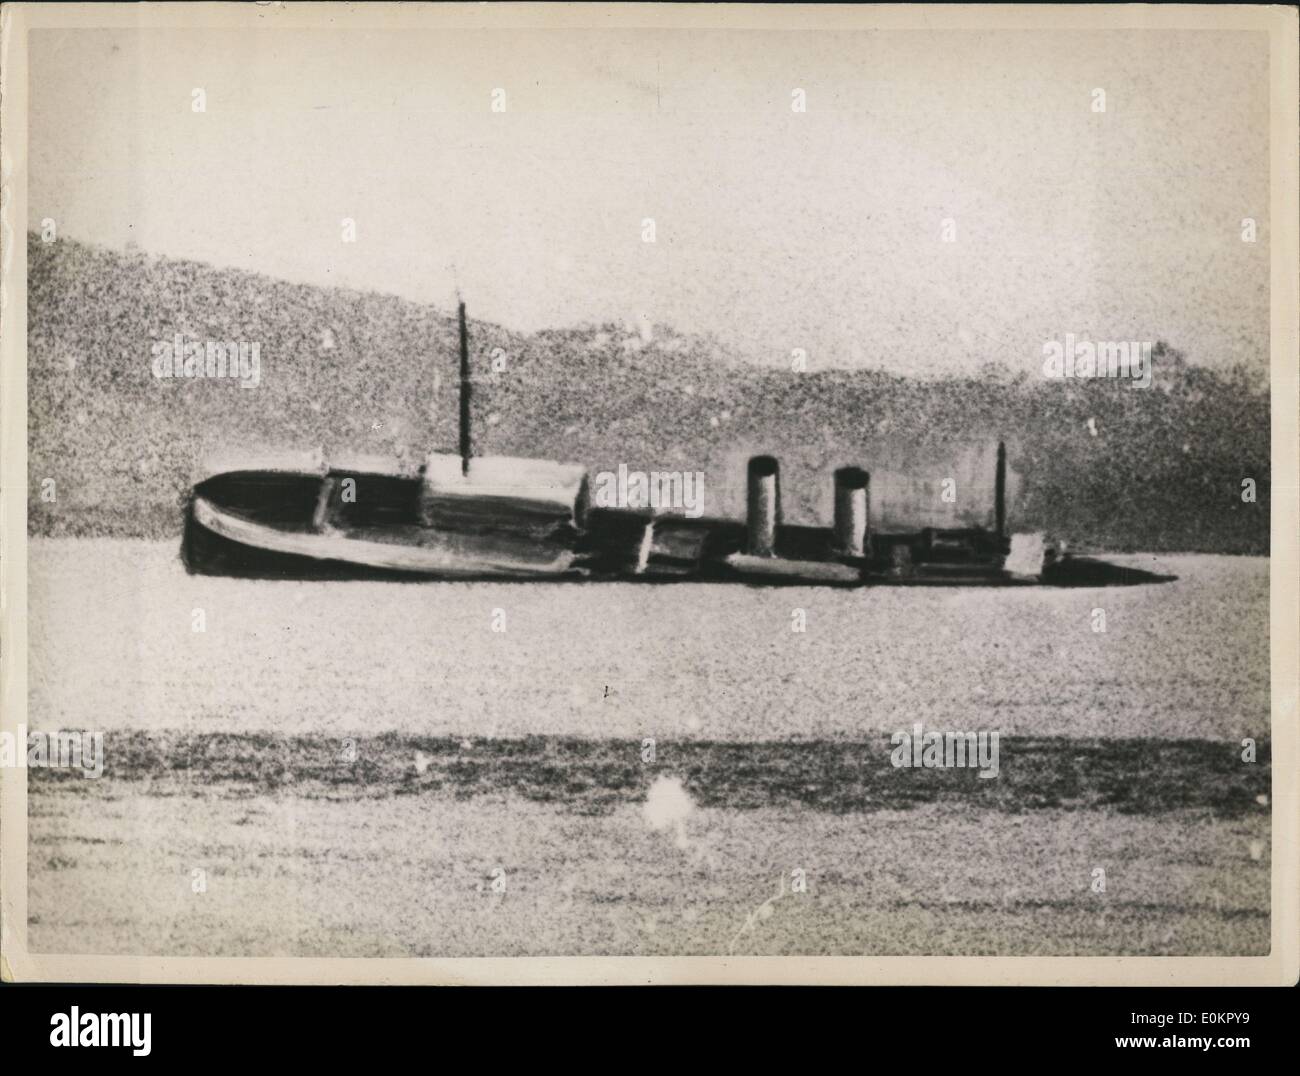 Dec. 12, 1937 - Nanjing, China - The USS Panay incident was a Japanese attack on the American gunboat Panay while she was anchored in the Yangtze River outside Nanking (now known as Nanjing). Stock Photo